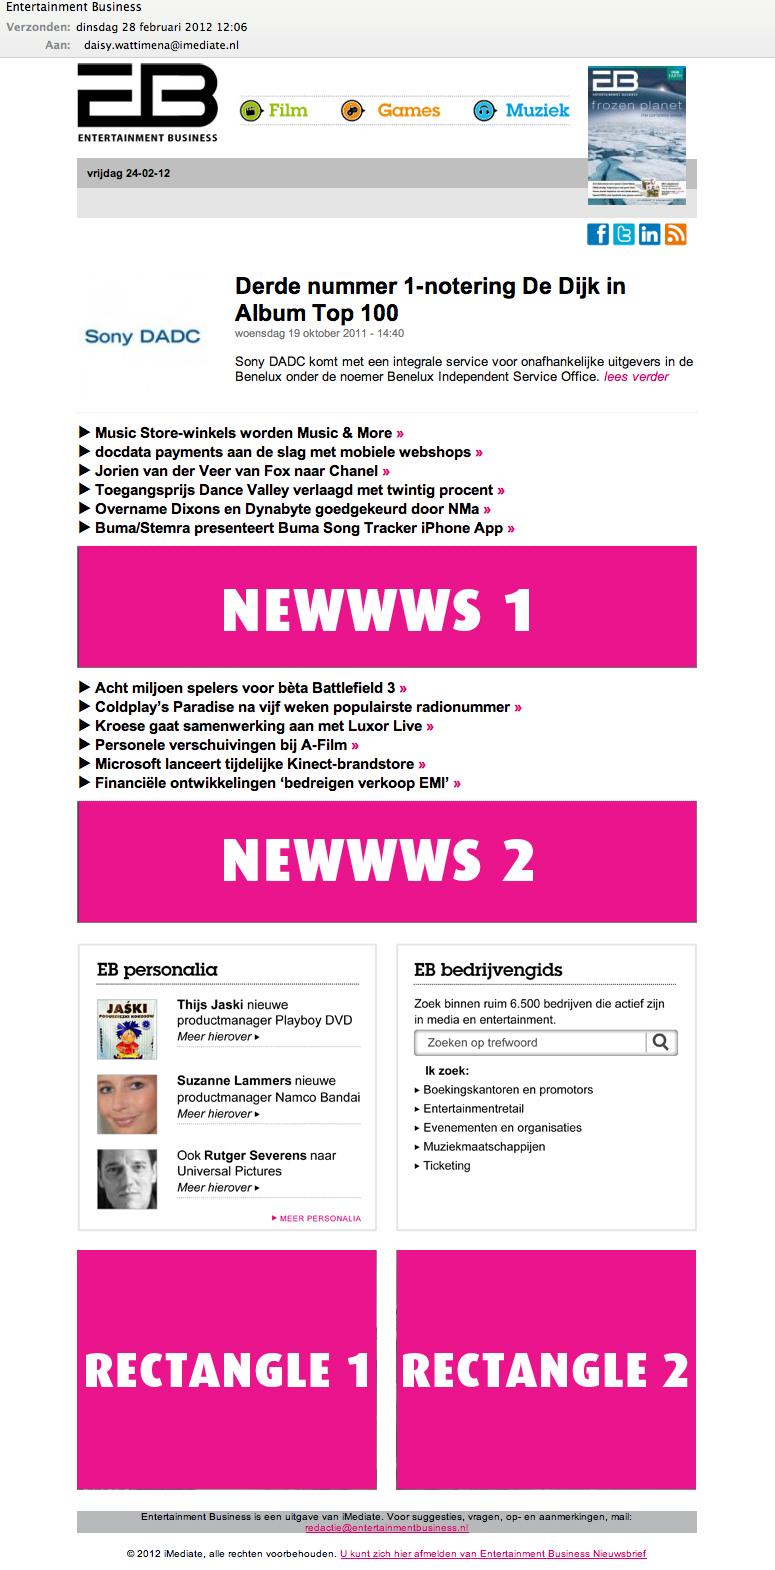 ONLINE BANNER RATES /// All rates are in Euro and excluding V.A.T. Banners and vacancies will be displayed in our daily newsletter EB Newwwz and on the website www.entertainmentbusiness.nl.